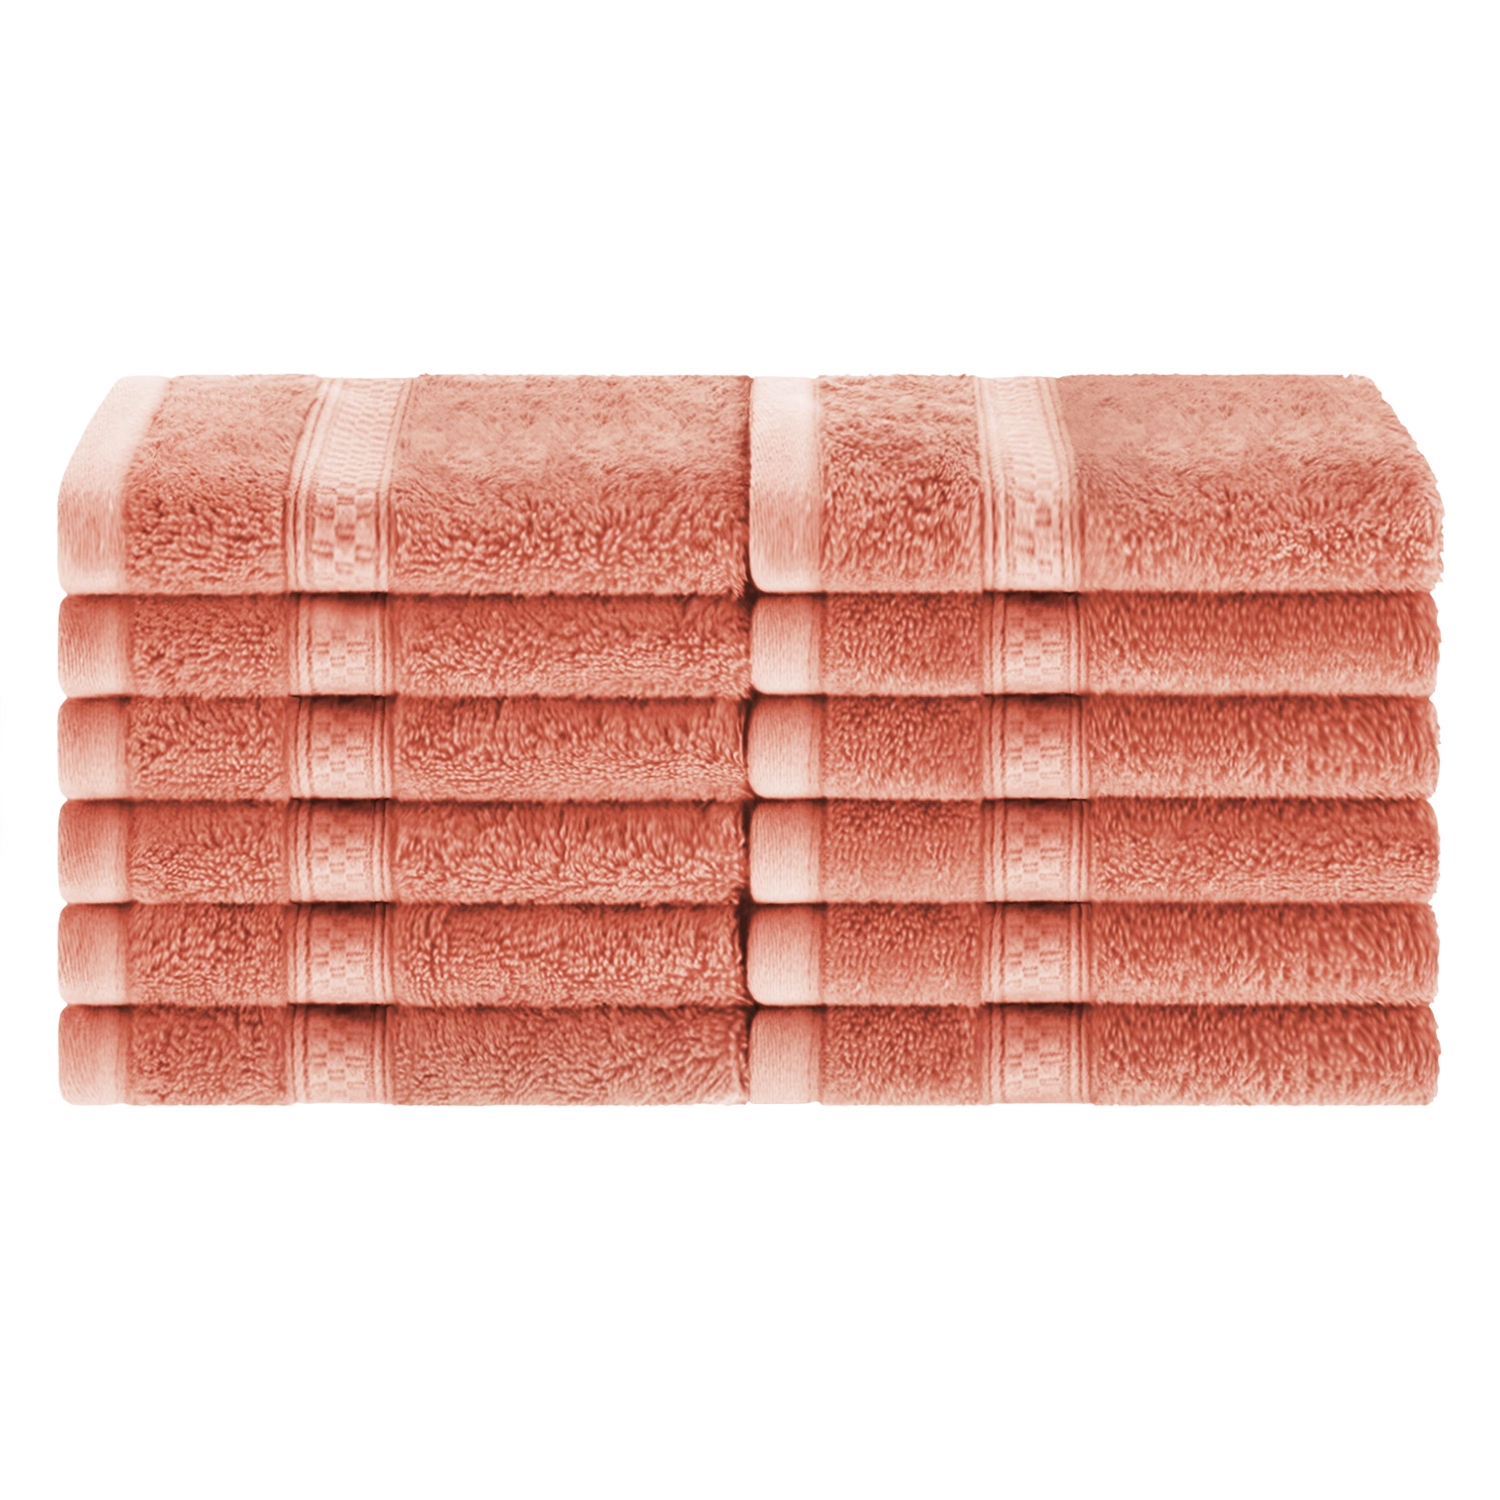 Superior Rayon from Bamboo 12-Piece Face Towel Set - image 1 of 7